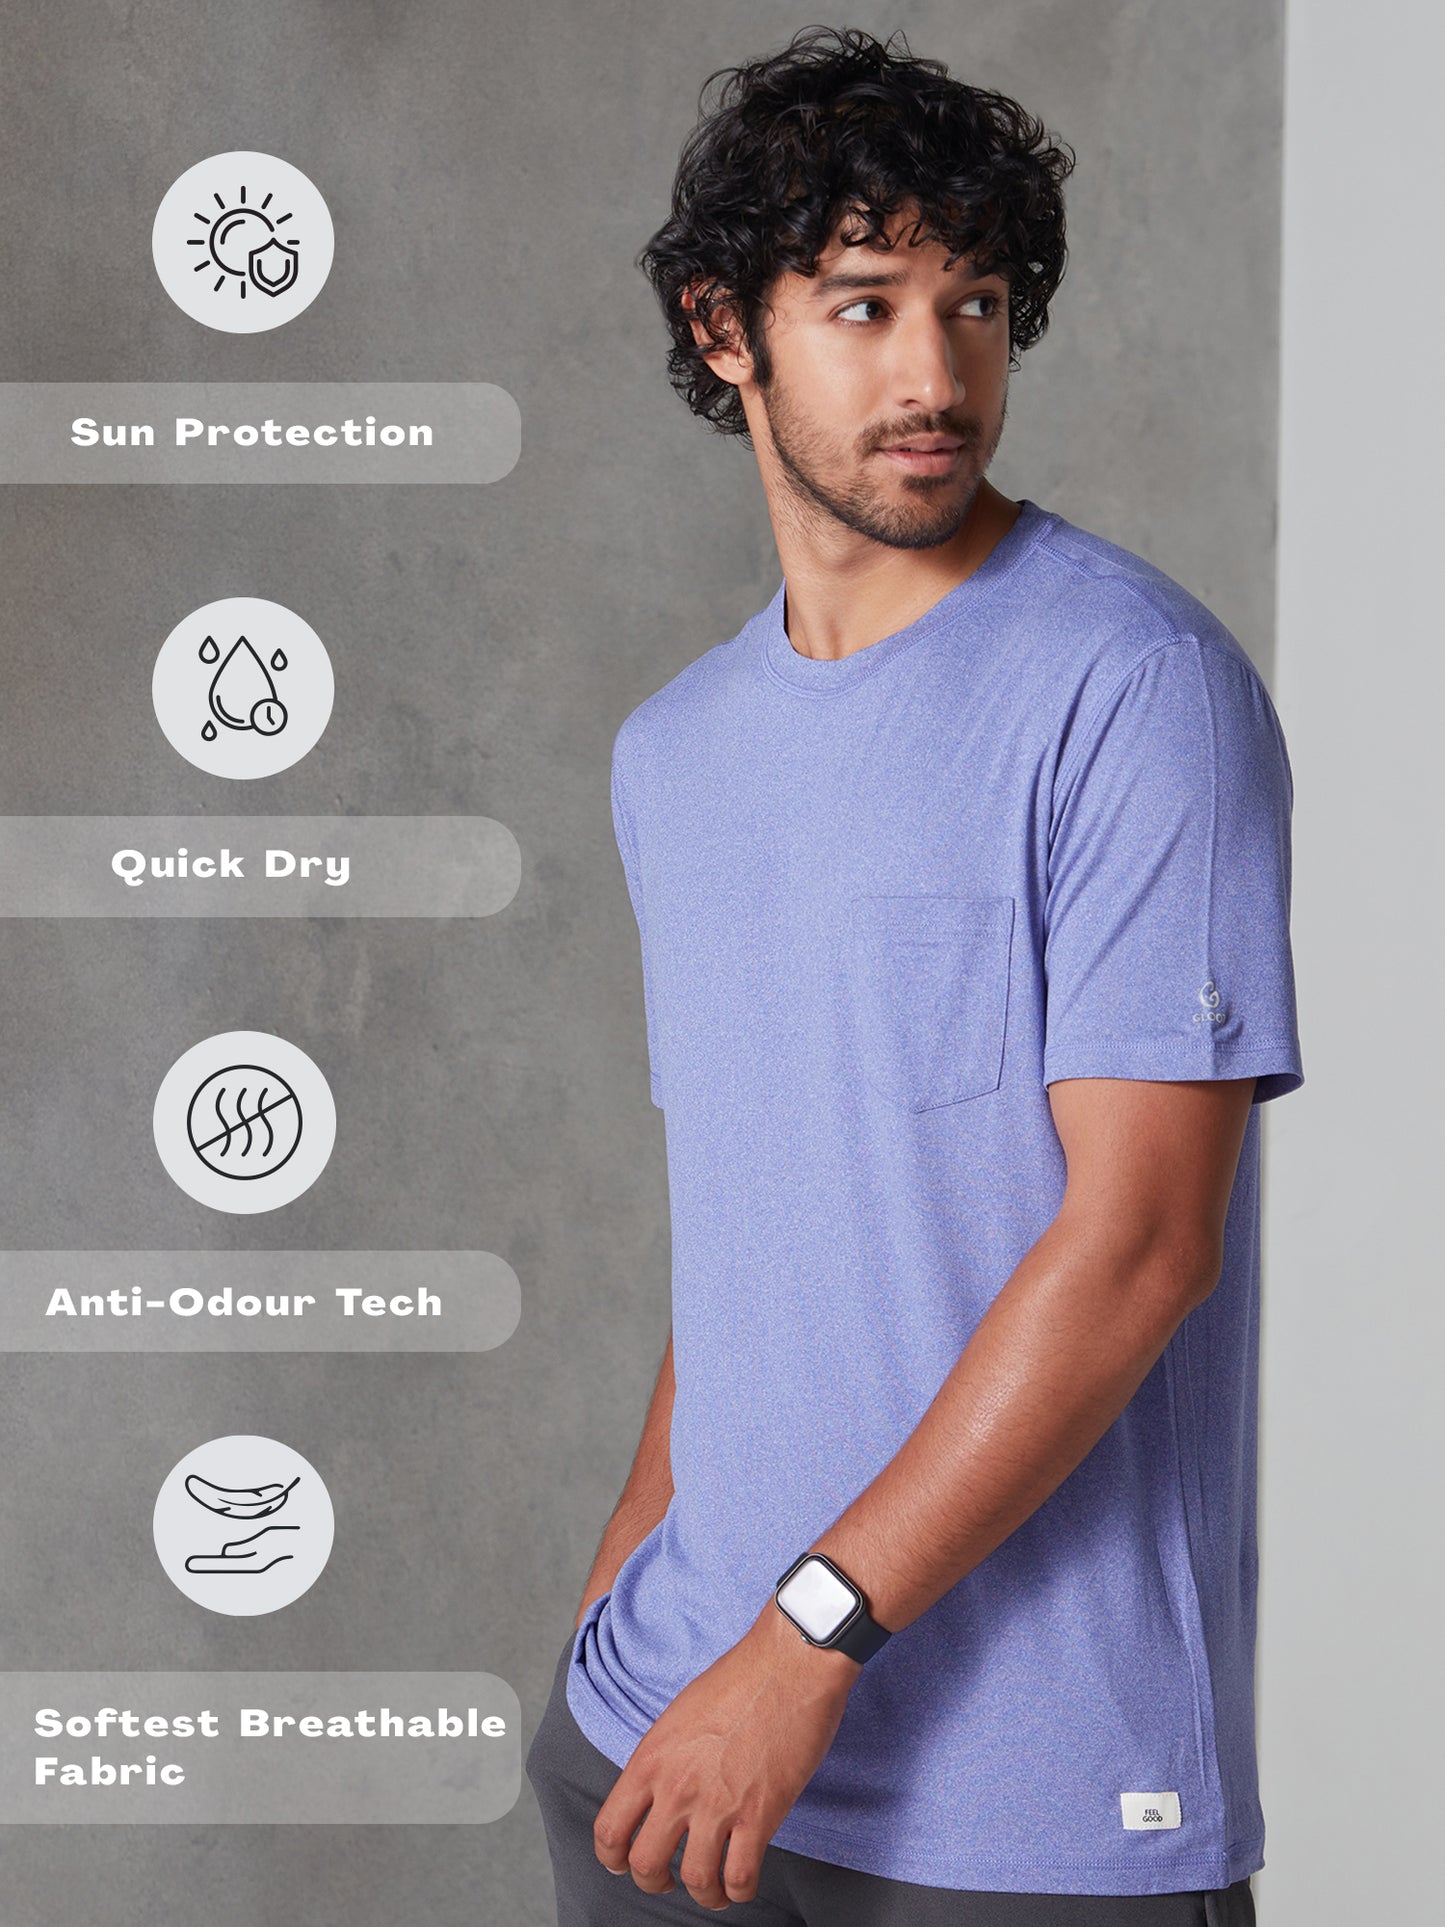 Active Soft Tee Lavender